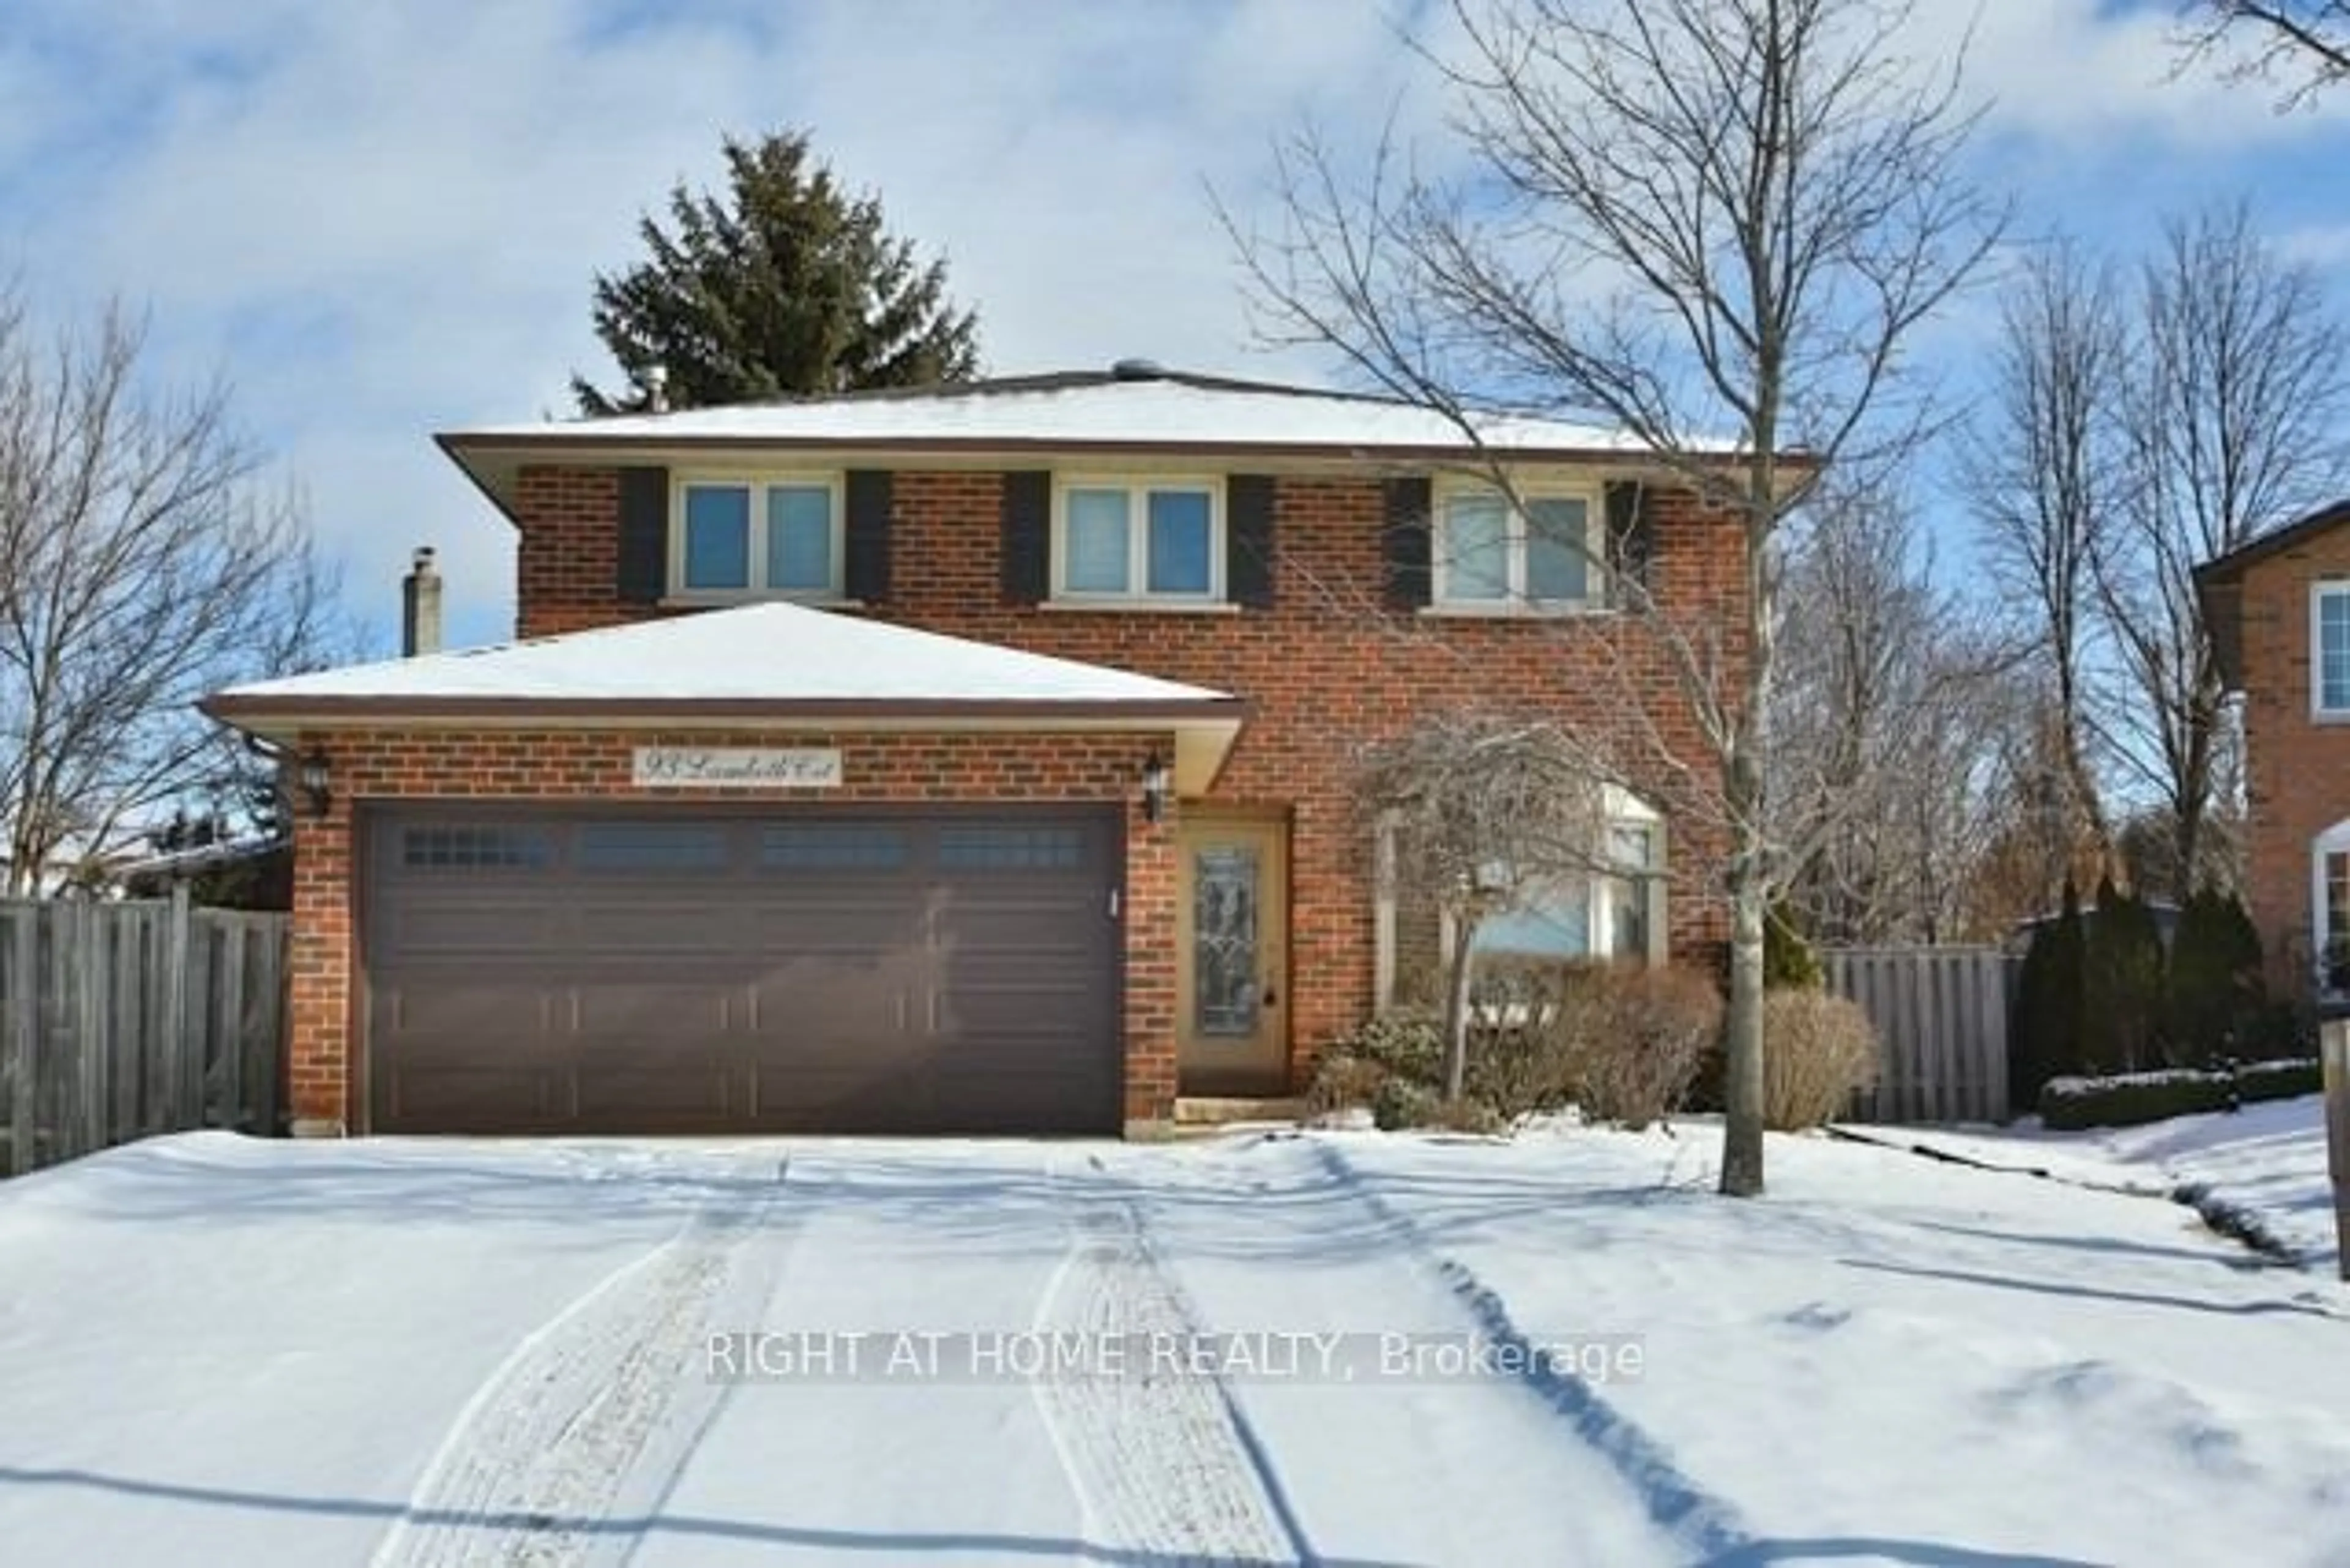 Home with brick exterior material for 93 Lambeth Crt, Newmarket Ontario L3Y 6S2